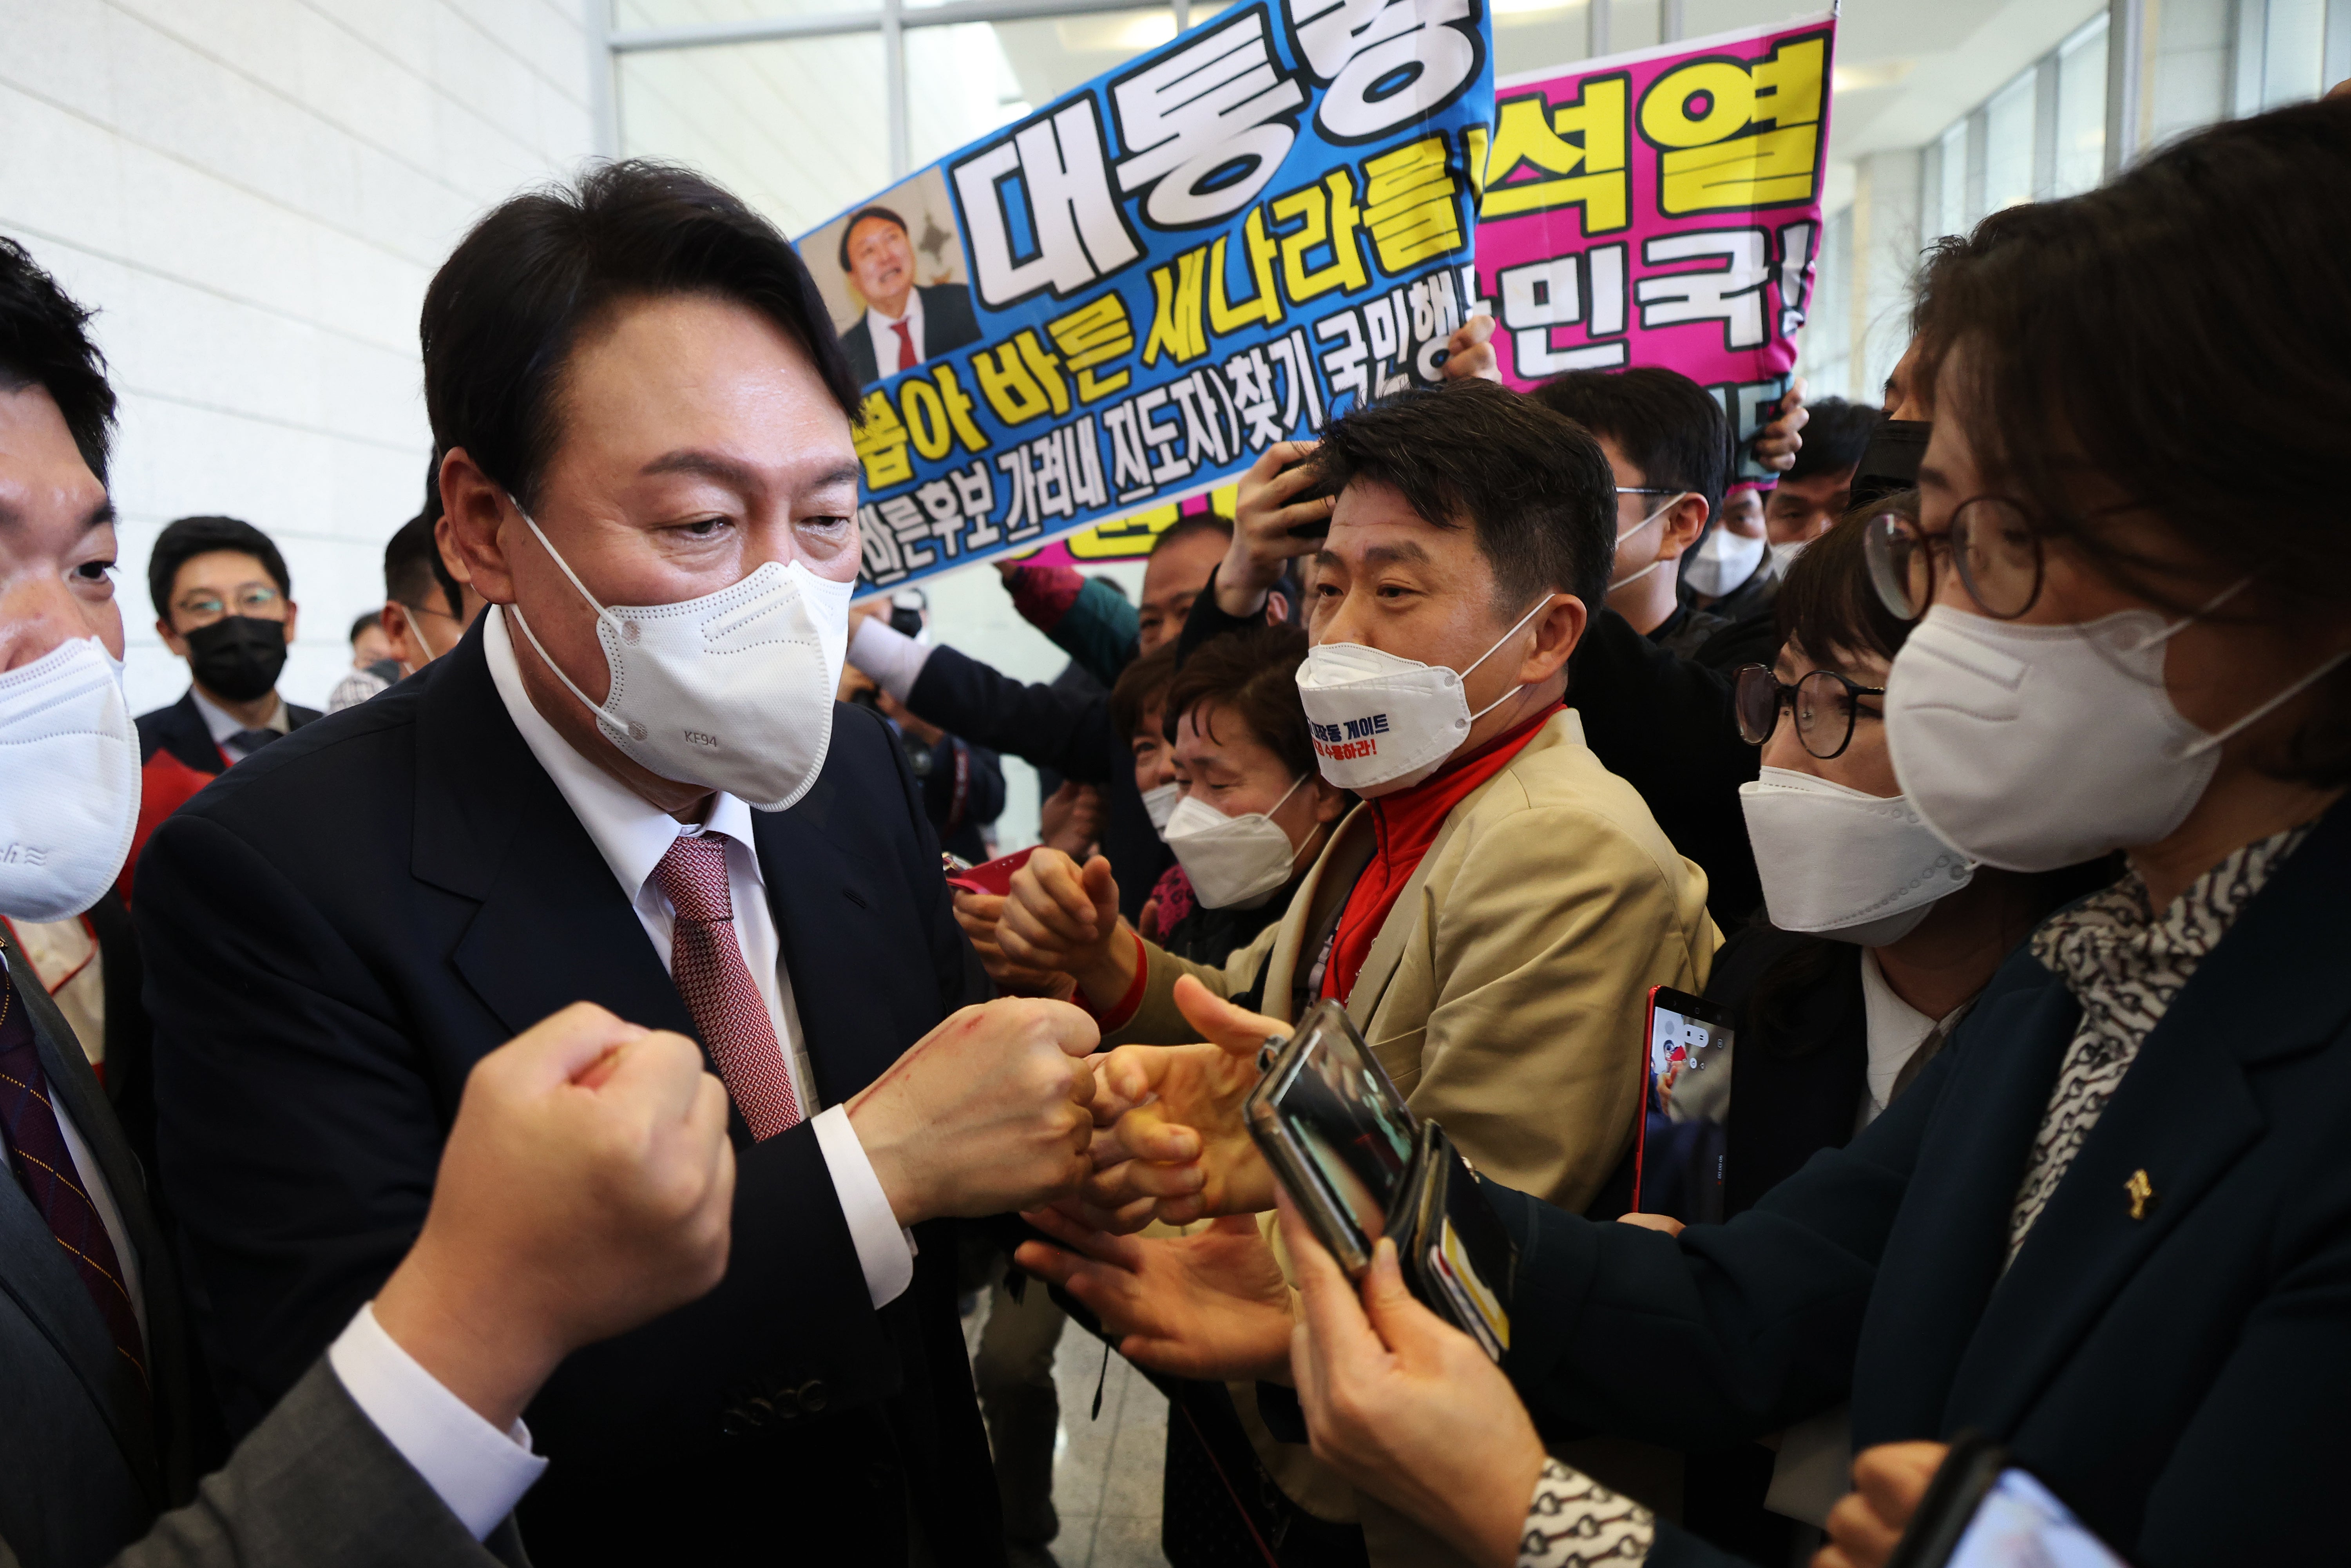 File photo: Presidential election candidate Yoon Seok-Youl celebrates with his supporters in Seoul, South Korea, 5 November 2021